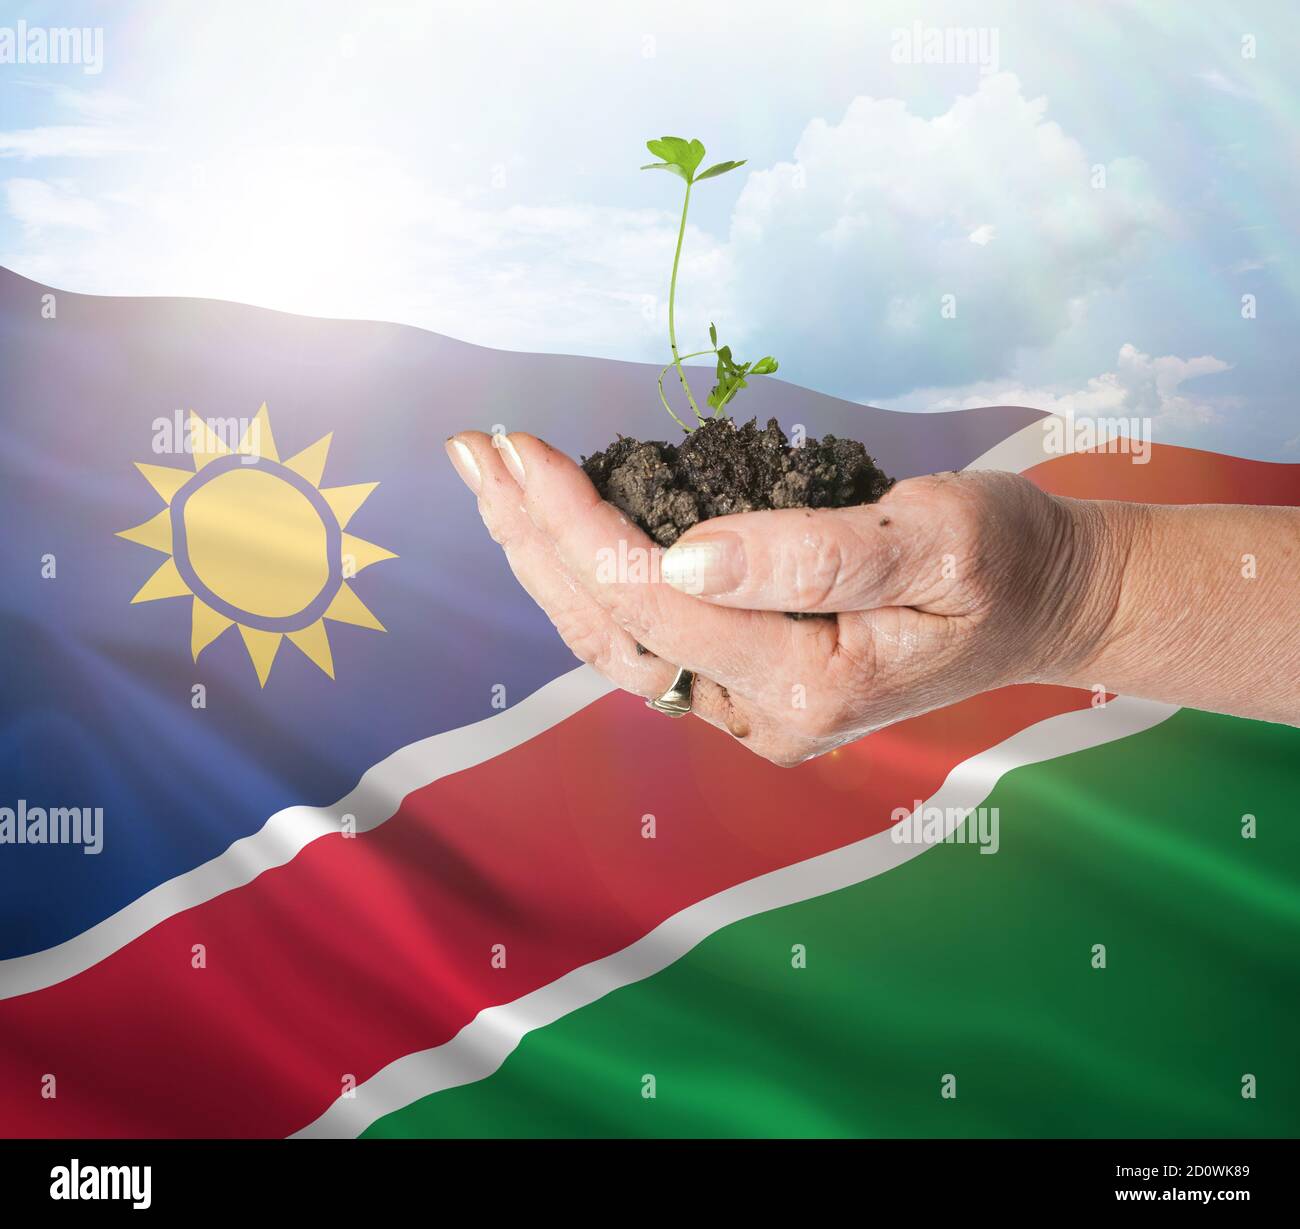 Namibia growth and new beginning. Green renewable energy and ecology concept. Hand holding young plant. Stock Photo